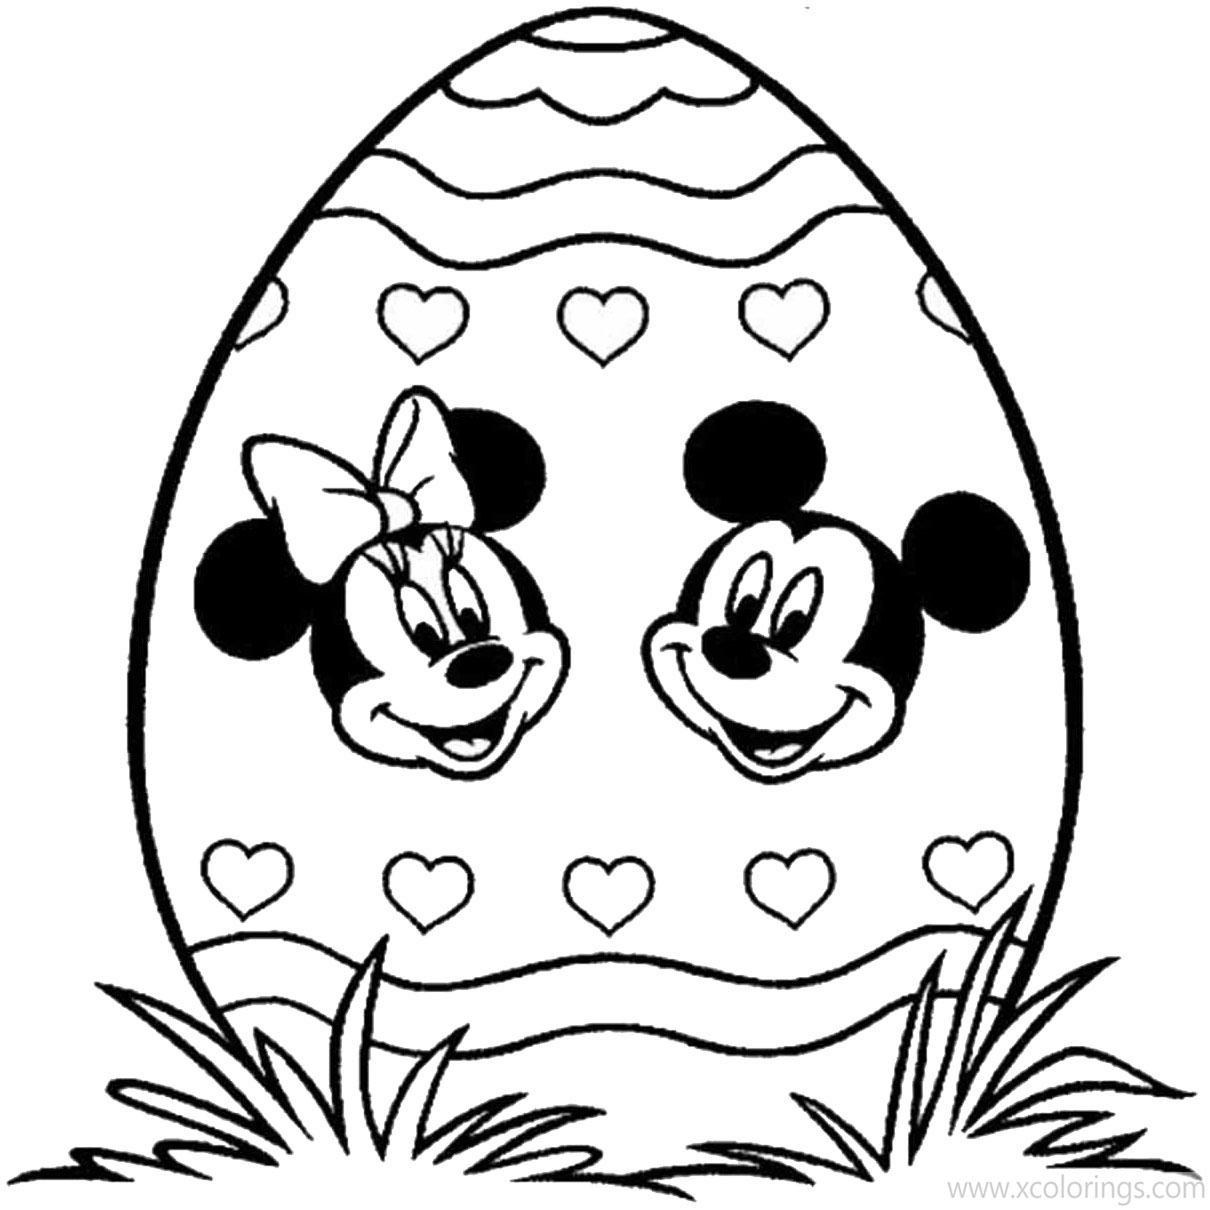 Free Disney Easter Coloring Pages Mickey Mouse and Minnie Mouse Easter Egg Template printable